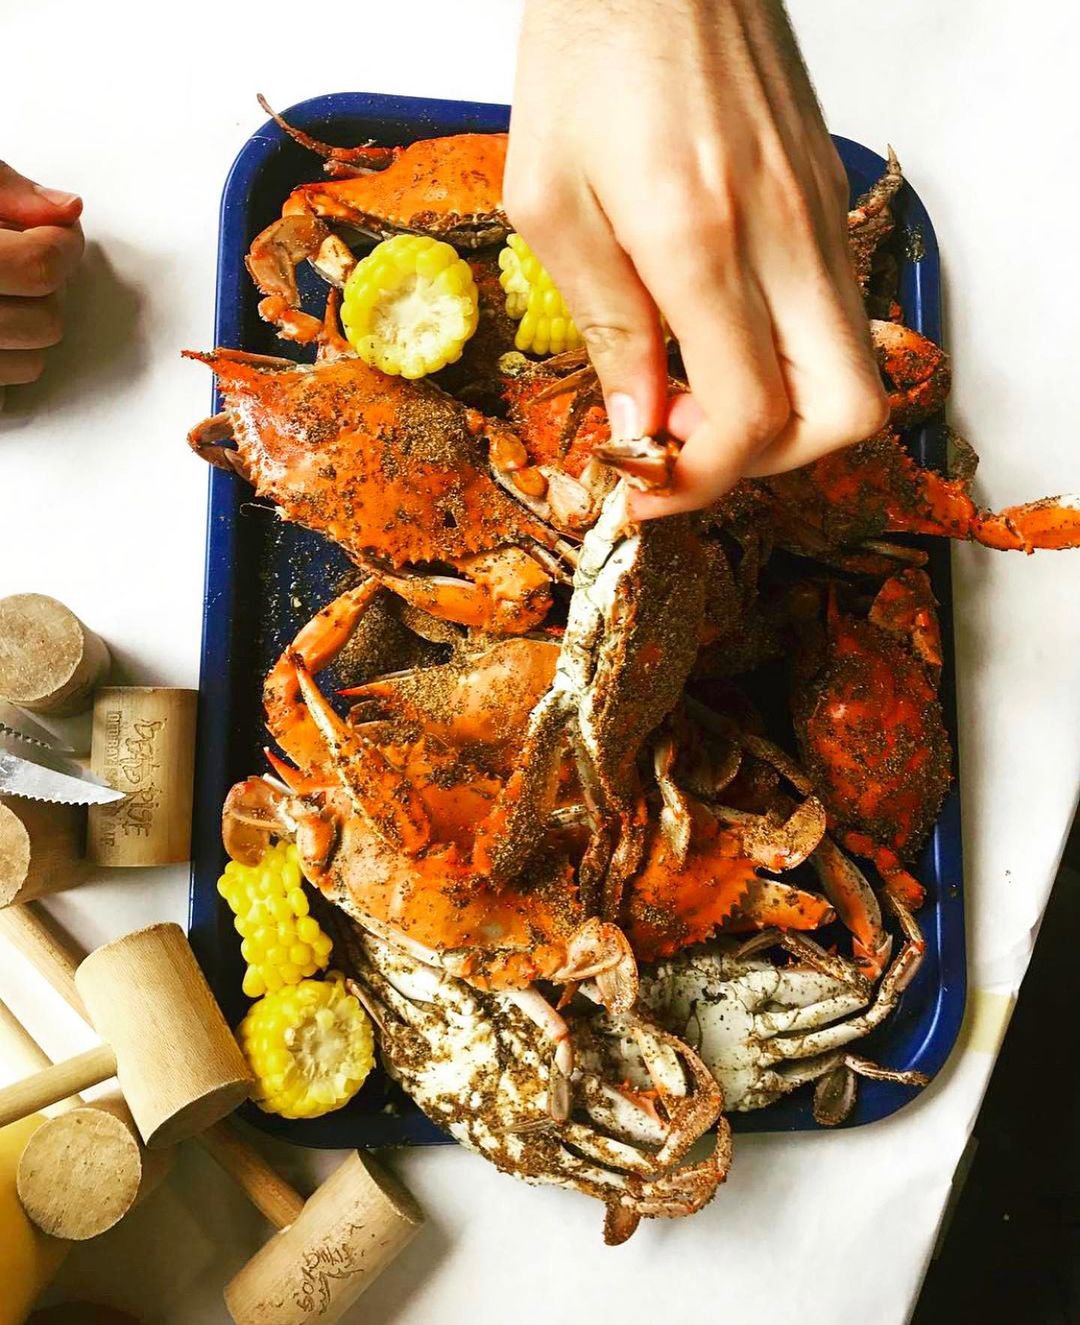 Looking for Cheap Blue Crab? Buy a Plane Ticket to France